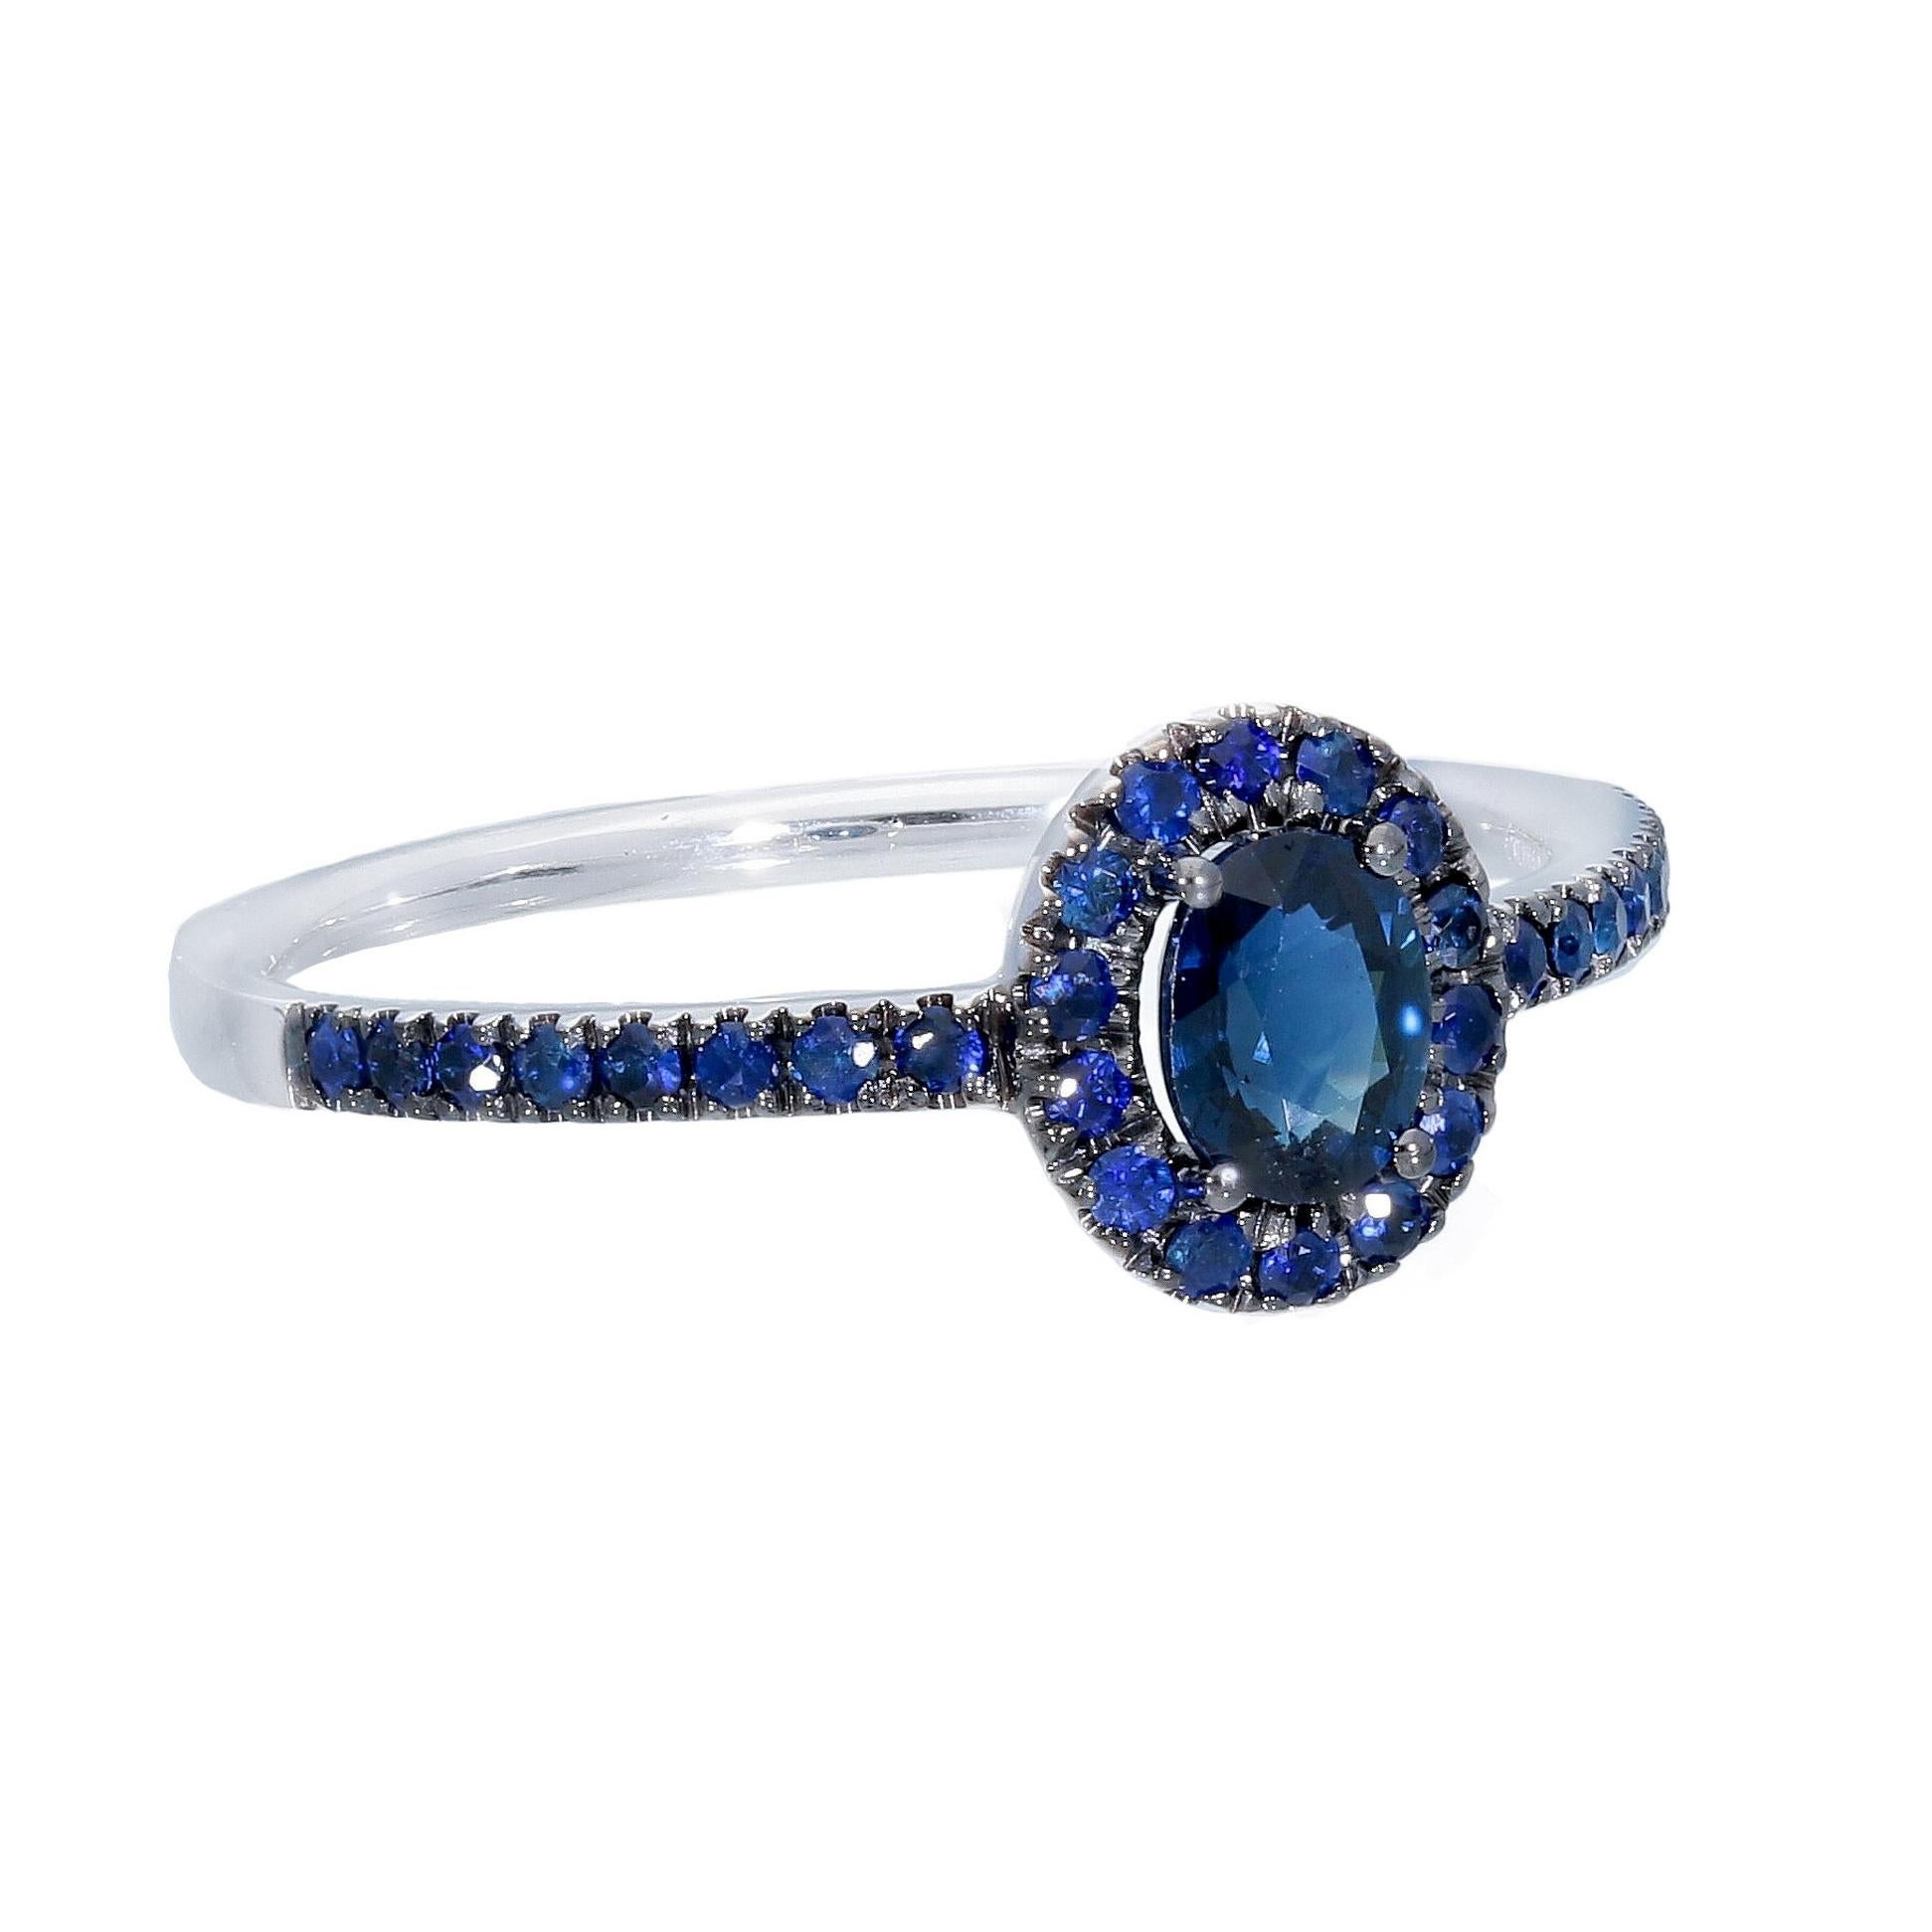 For Sale:  18k Black and White Golg Wedding Ring with Blue Sapphire 2